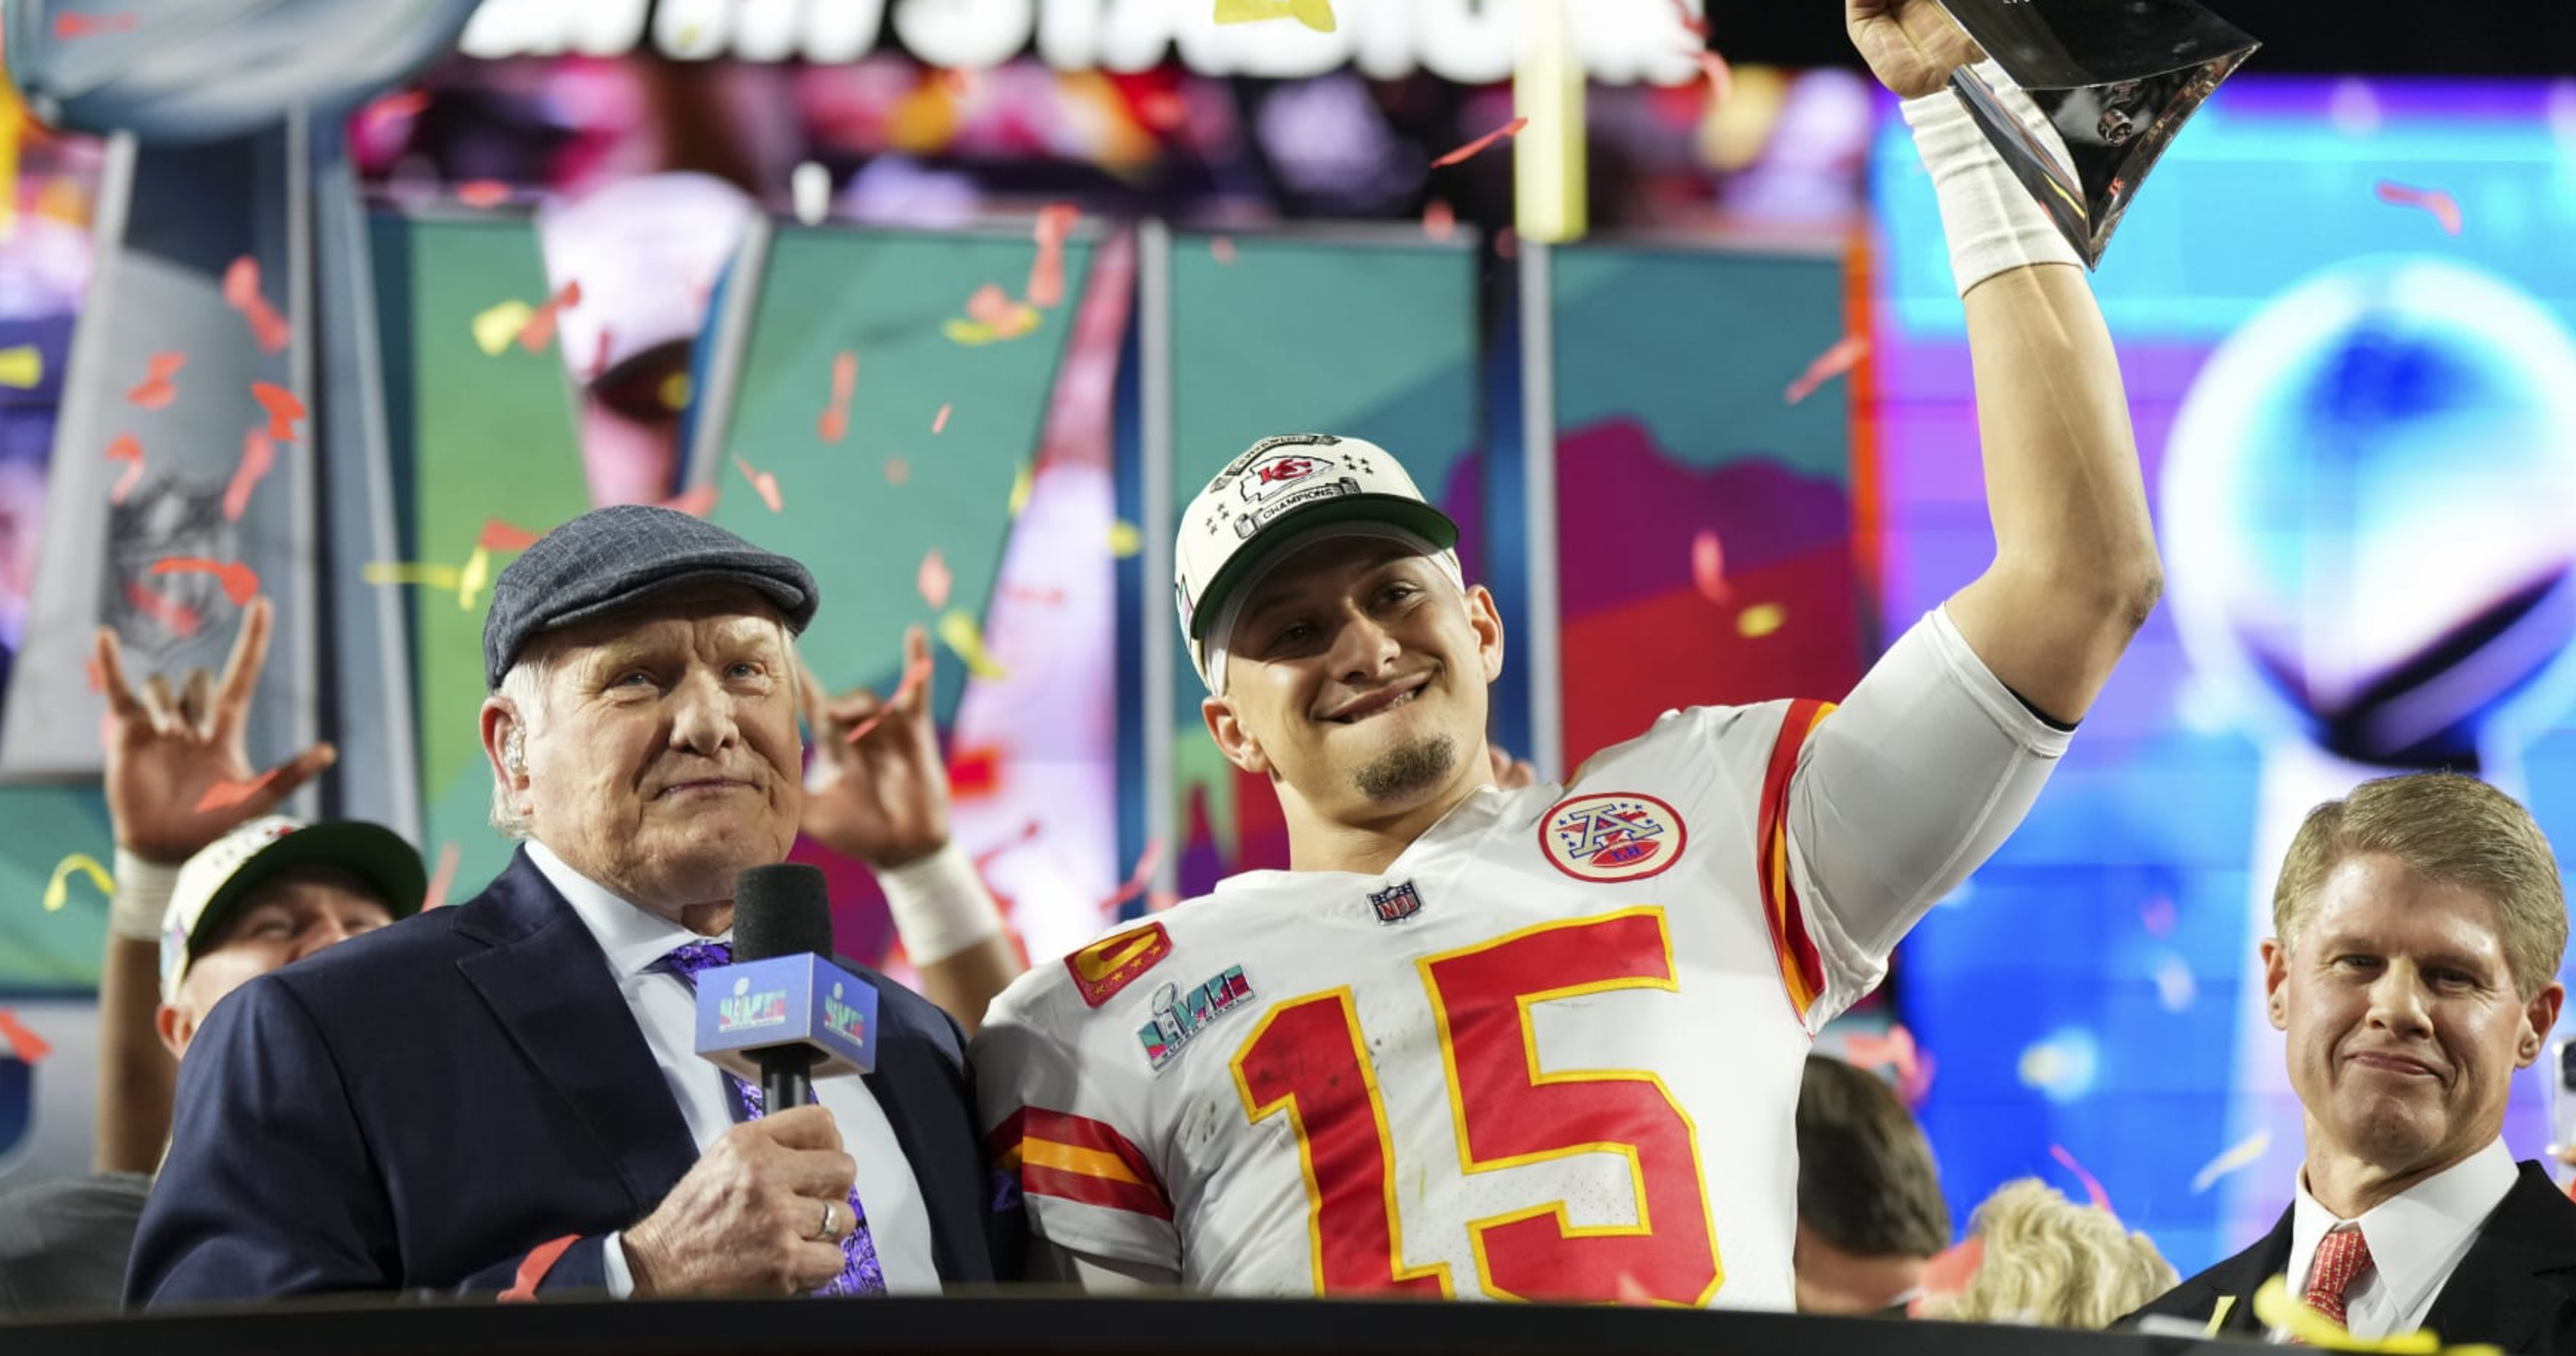 Super Bowl rematch between Chiefs-Eagles set for Monday Night Football